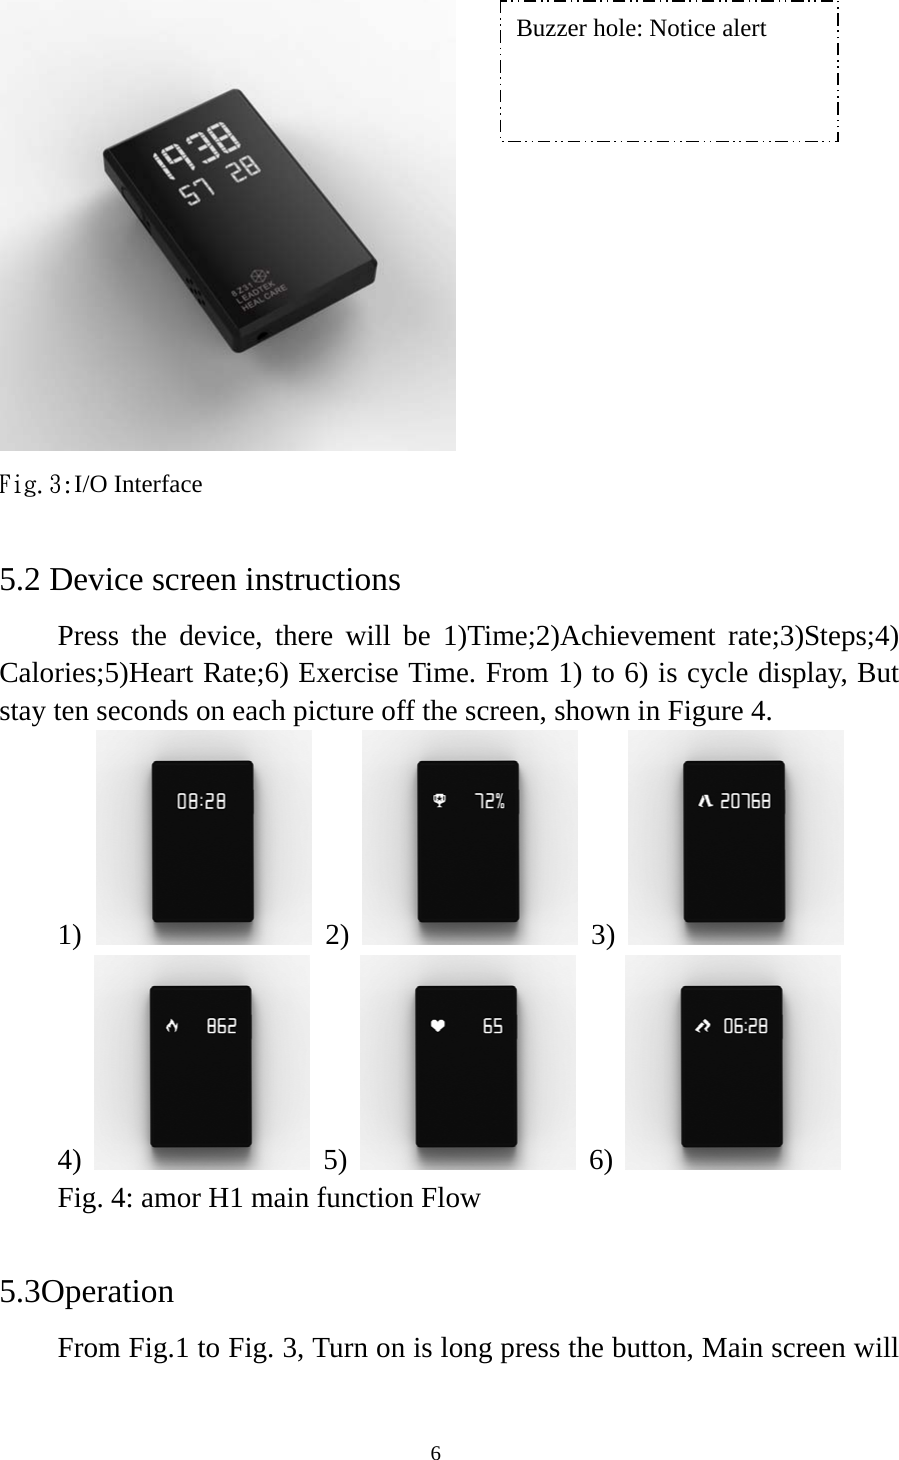  6 Fig.3:I/O Interface  5.2 Device screen instructions Press the device, there will be 1)Time;2)Achievement rate;3)Steps;4) Calories;5)Heart Rate;6) Exercise Time. From 1) to 6) is cycle display, But stay ten seconds on each picture off the screen, shown in Figure 4. 1)   2)  3)  4)  5)  6)  Fig. 4: amor H1 main function Flow  5.3Operation From Fig.1 to Fig. 3, Turn on is long press the button, Main screen will Buzzer hole: Notice alert 